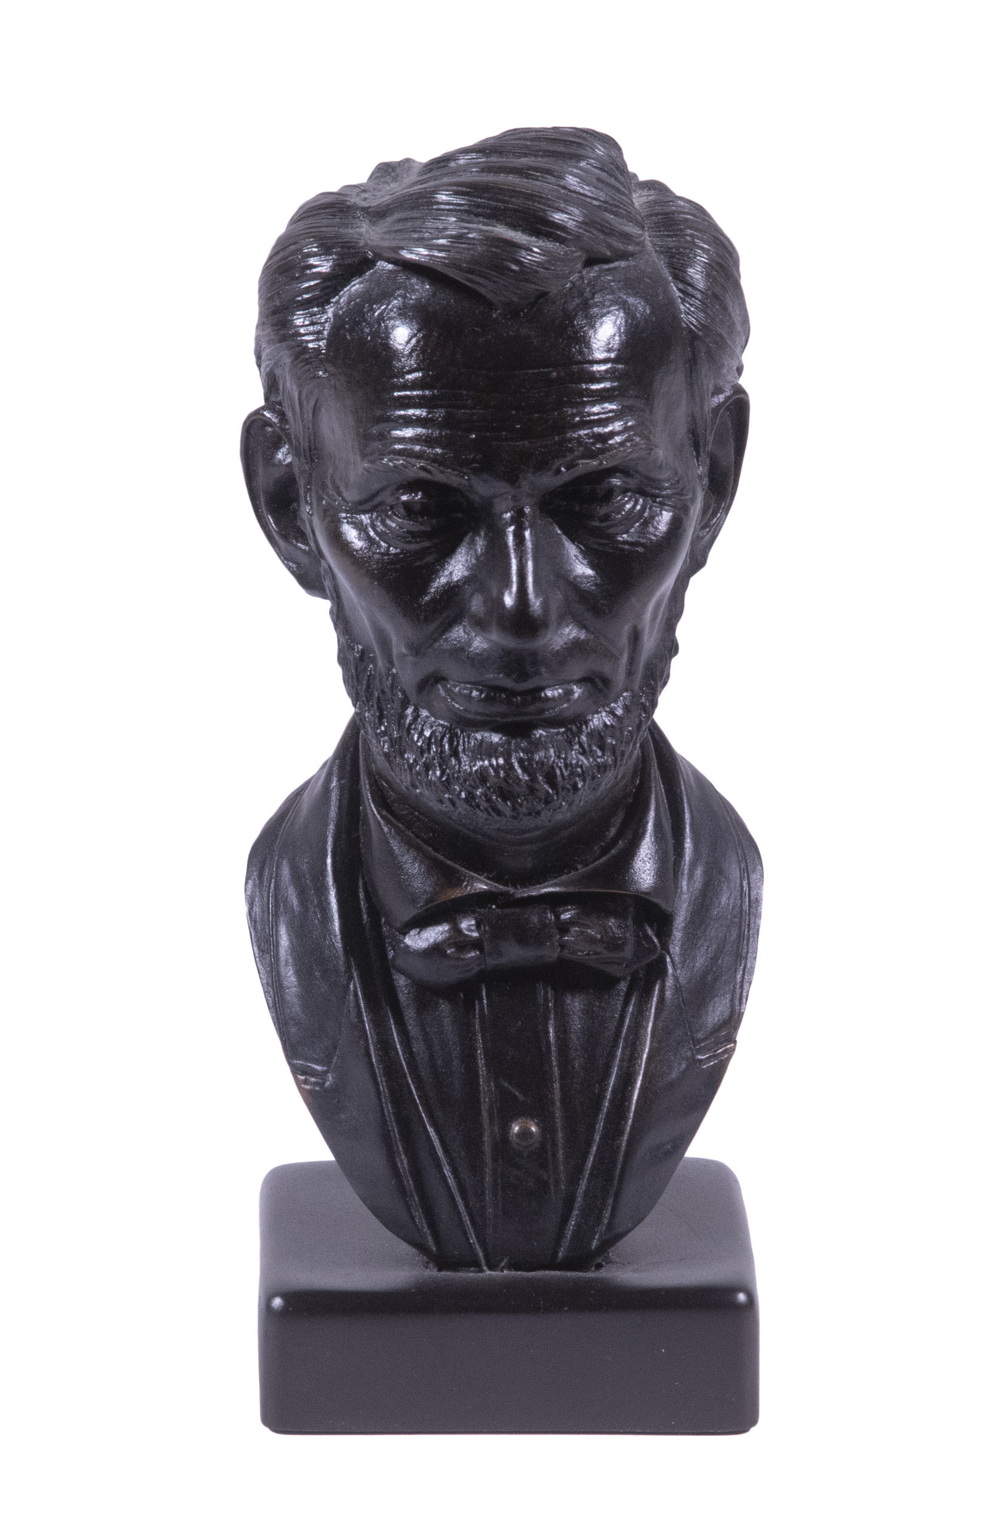 LINCOLN BUST PAPERWEIGHT Vintage 3025b4